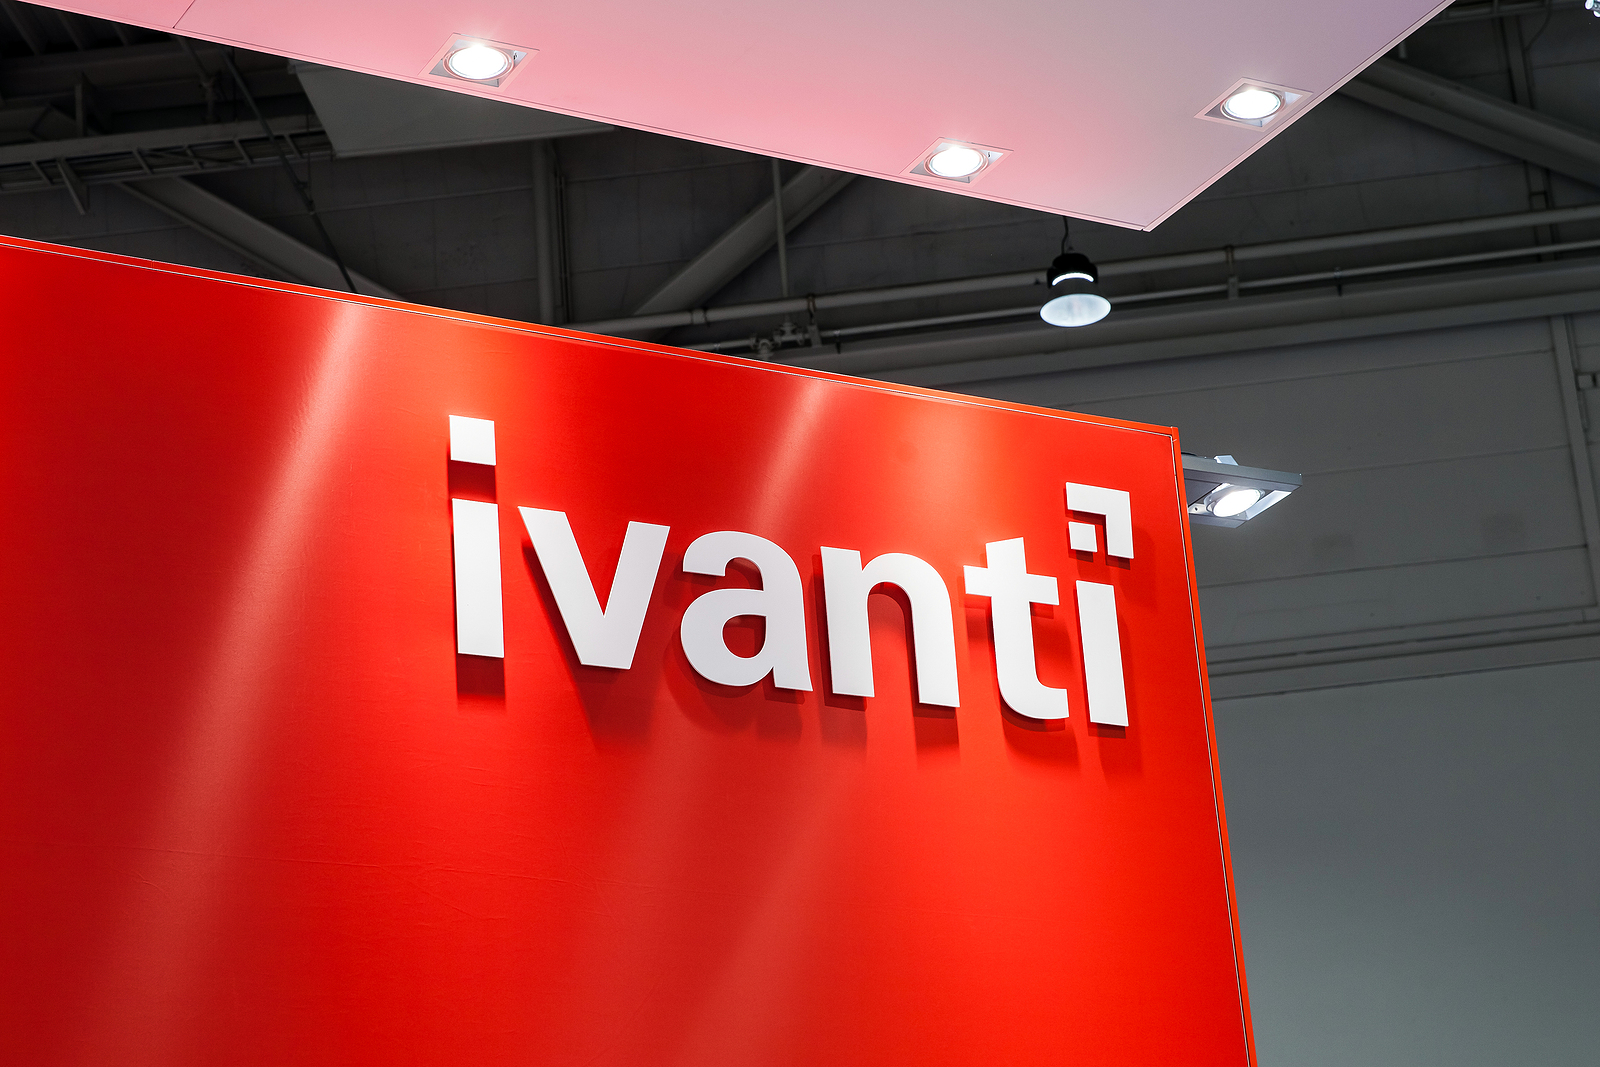 ivanti-zero-day-exploited-by-apt-since-at-least-april-in-norwegian-government-attack